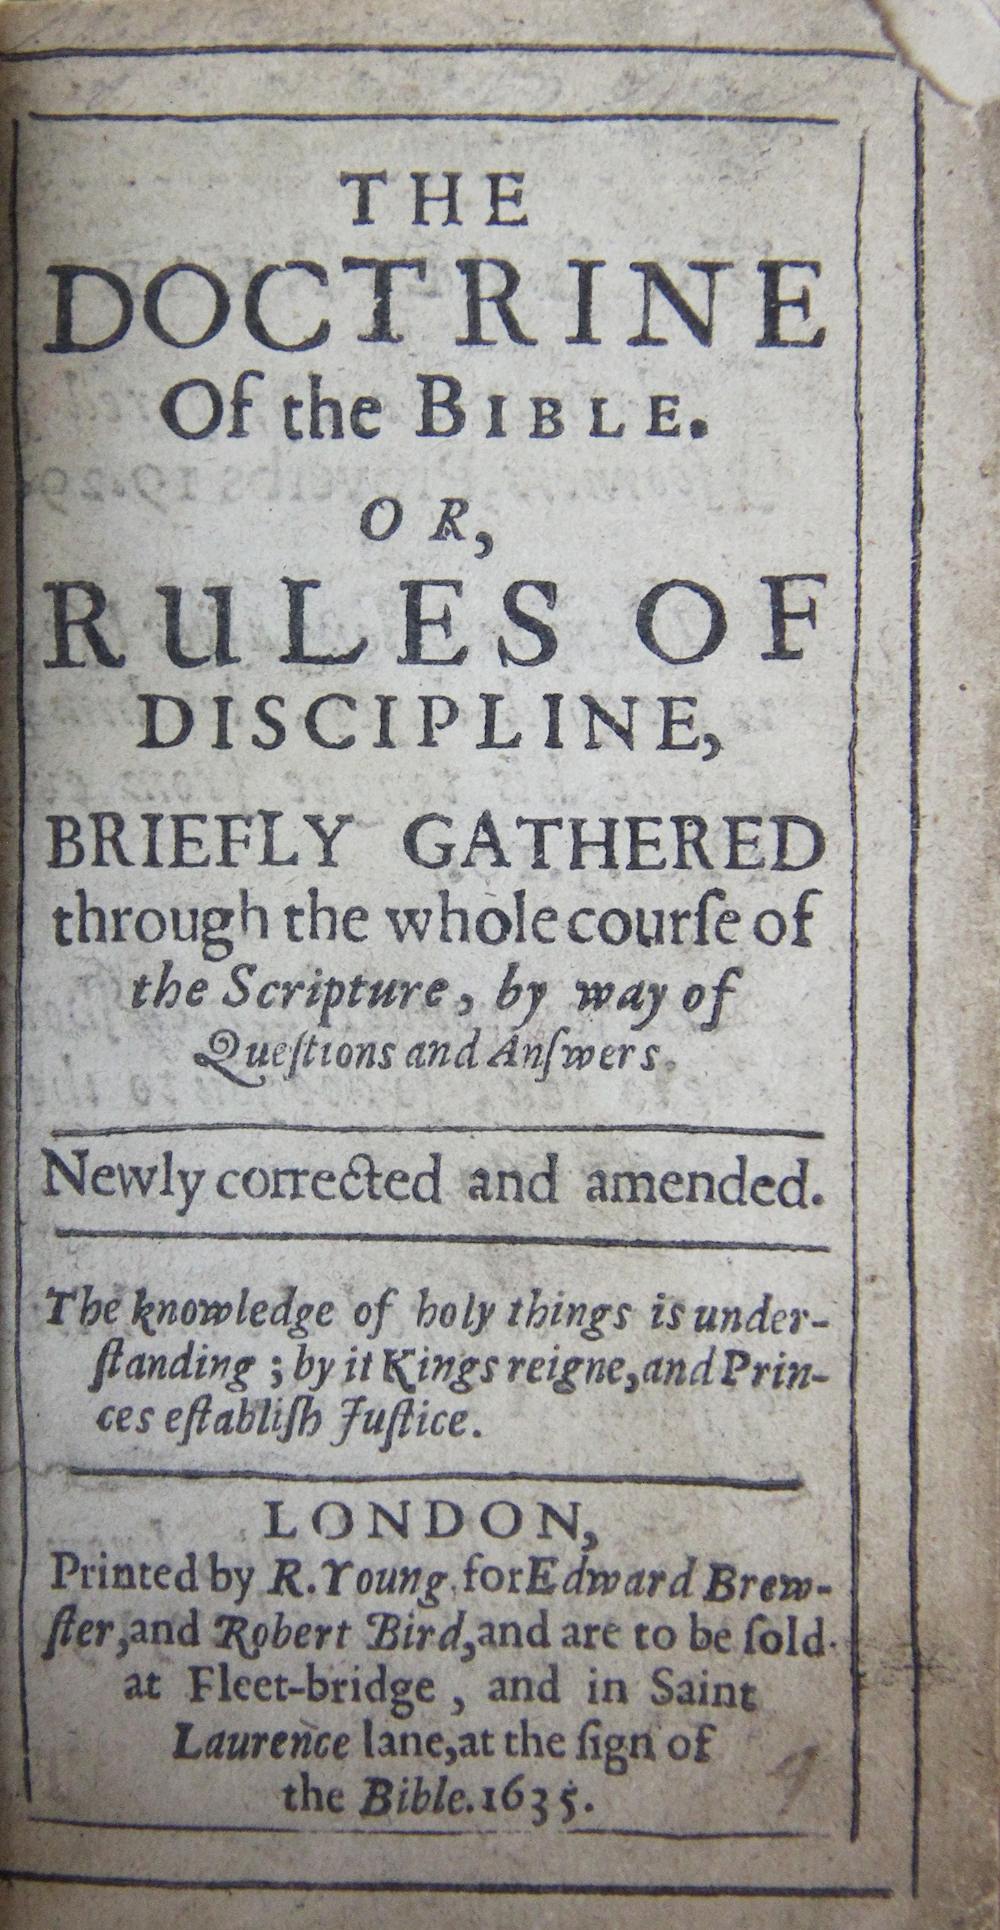 THE DOCTRINE OF THE BIBLE OR RULES OF DISCIPLINE BRIEFLY GATHERED, 24mo, - Image 2 of 4